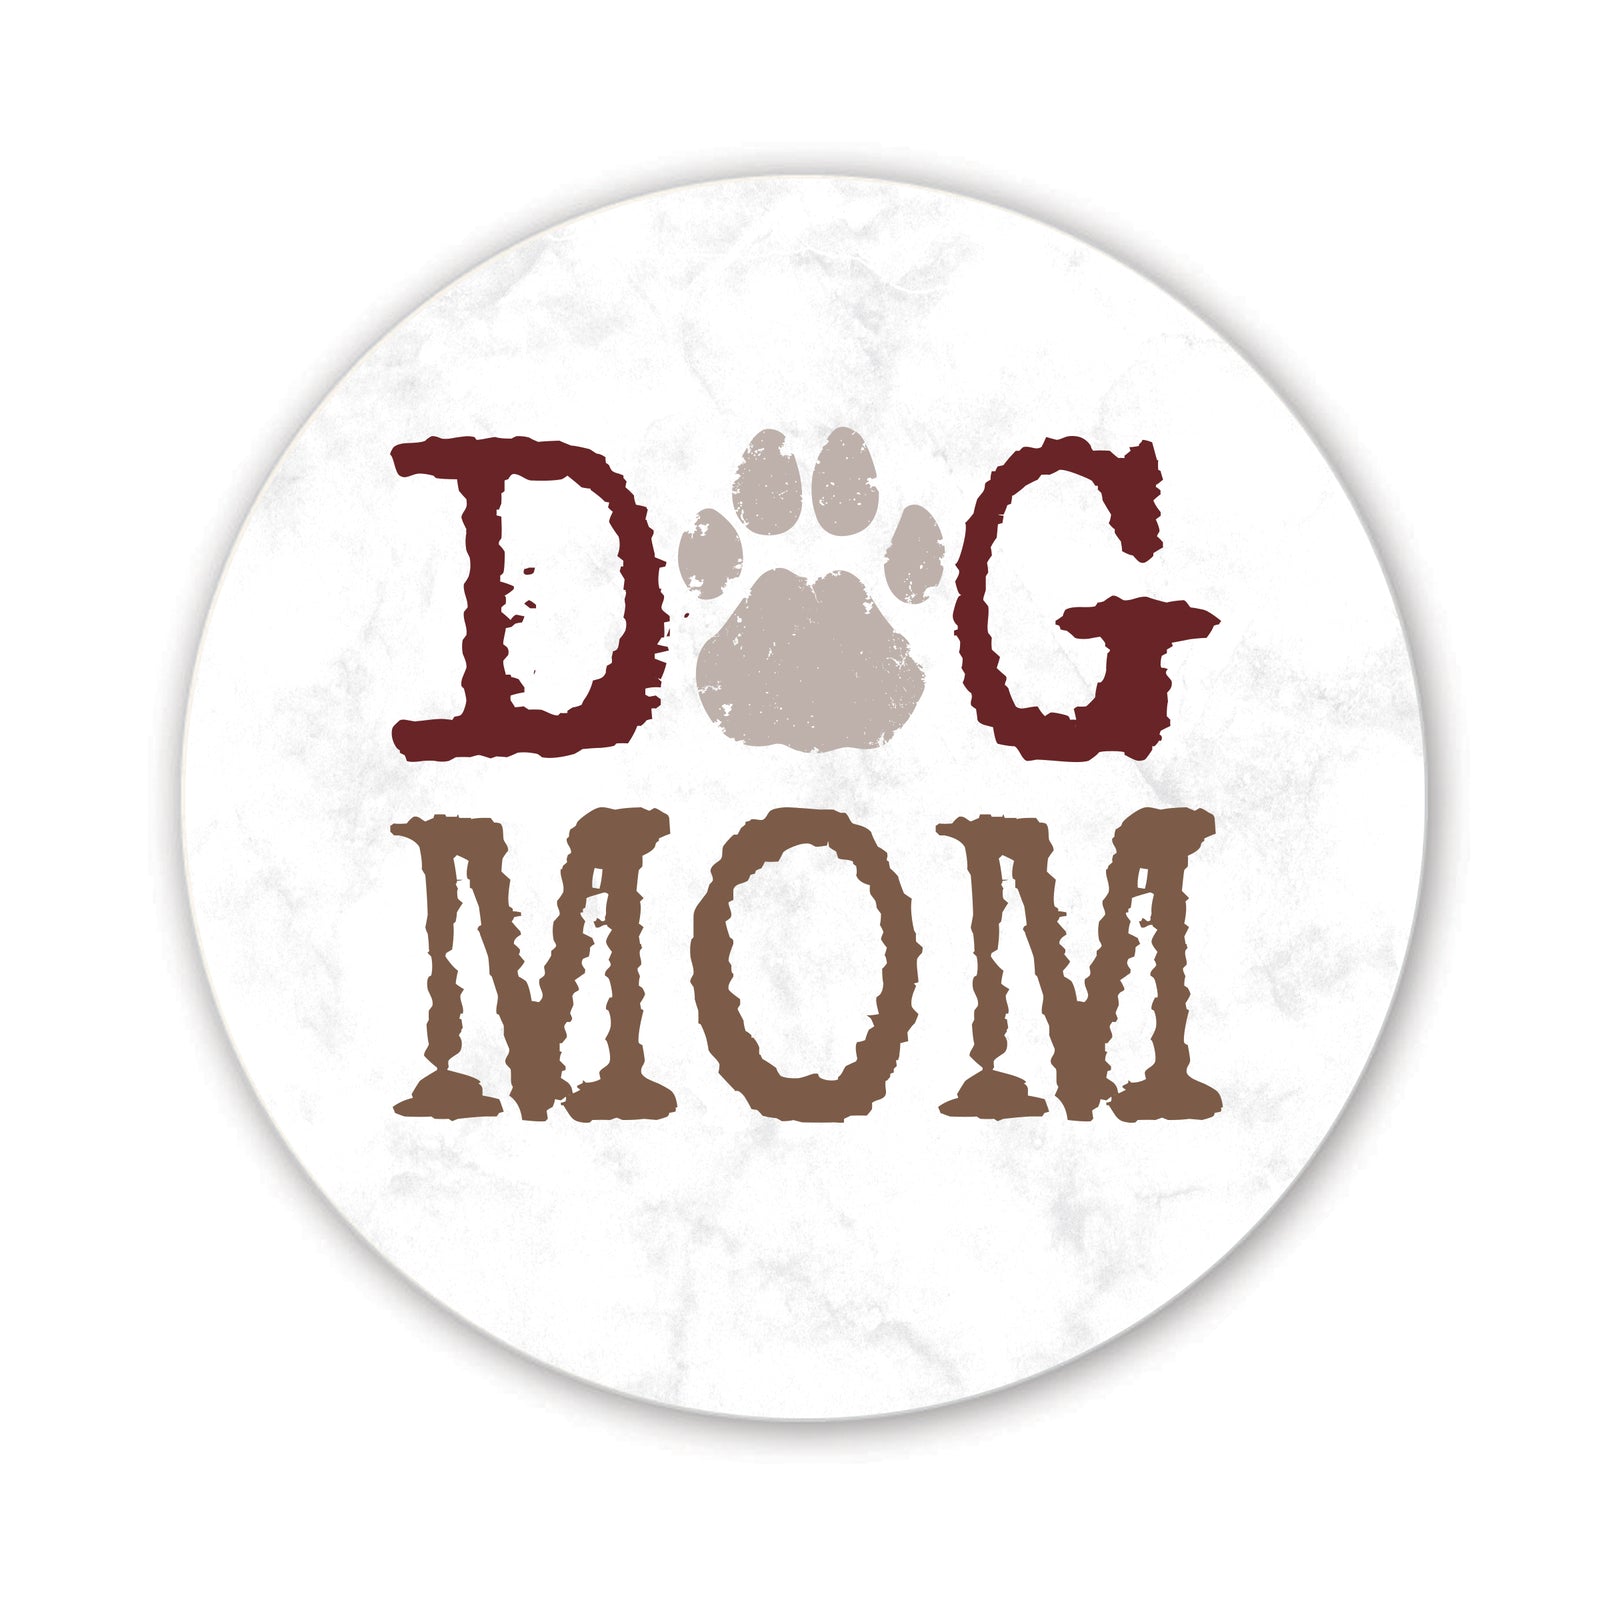 Refrigerator Magnet Perfect Gift Idea For Pet Owners - Dog Mom